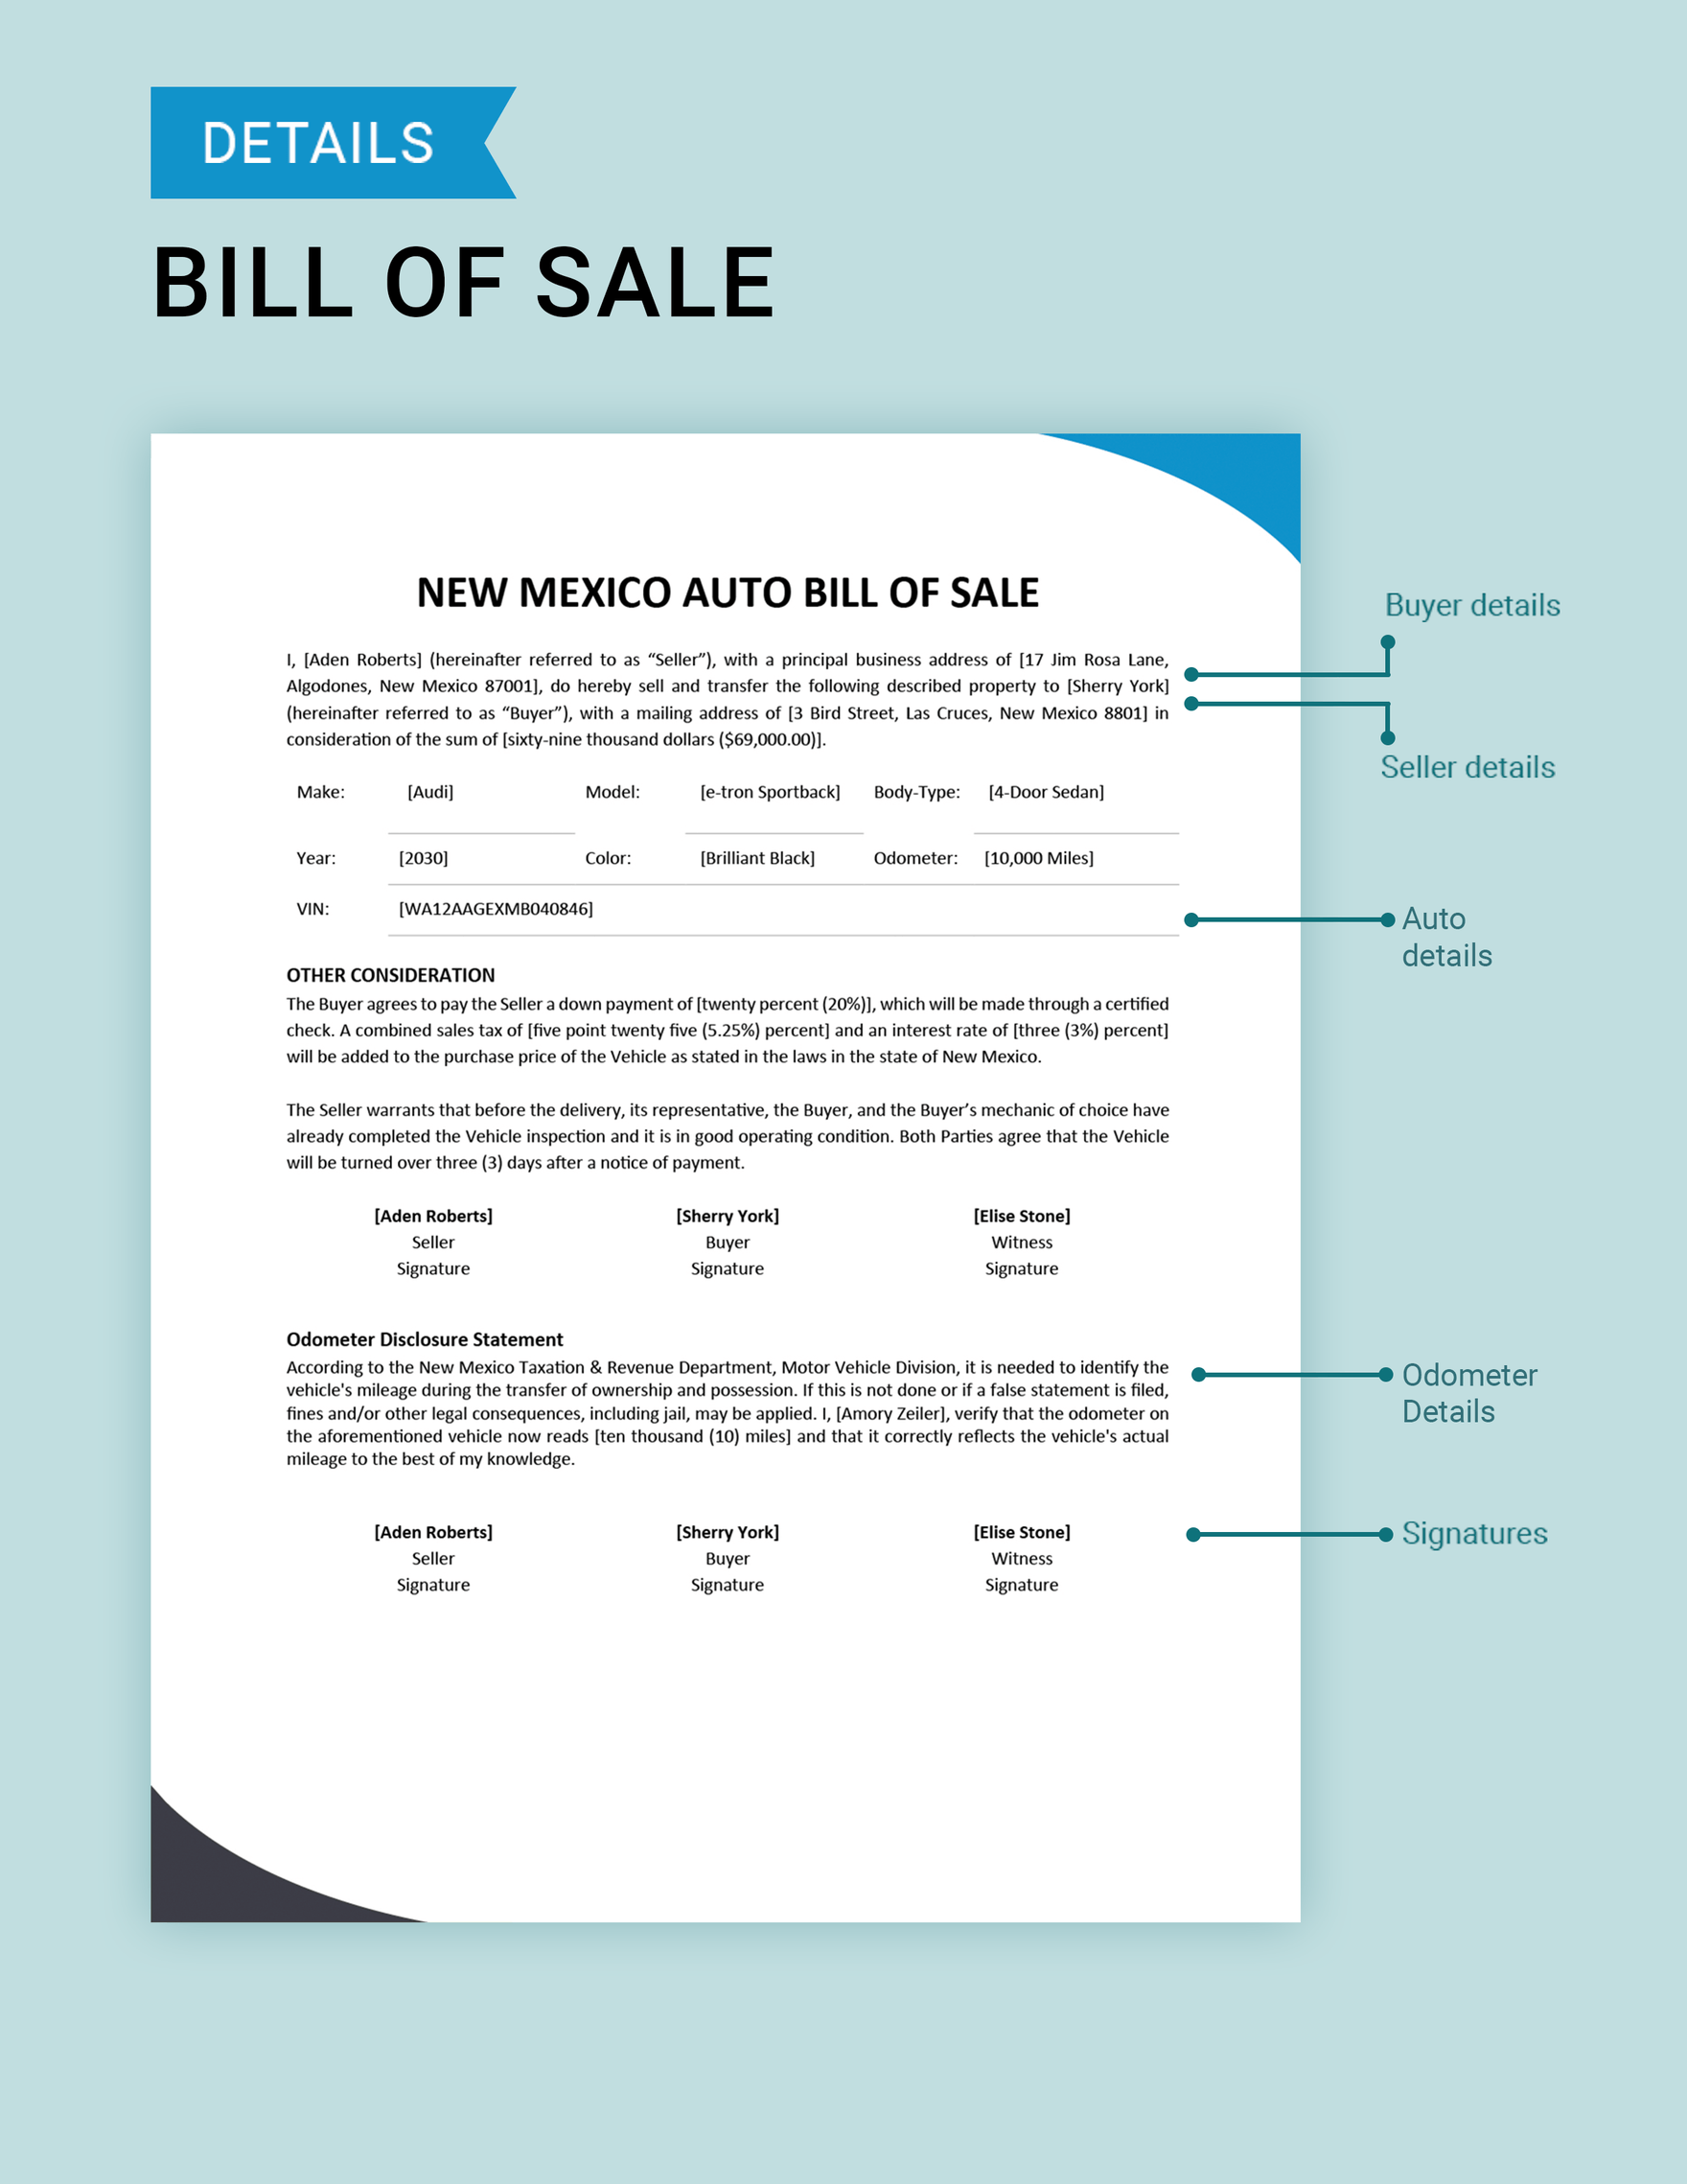 New Mexico Auto Bill of Sale Form Template